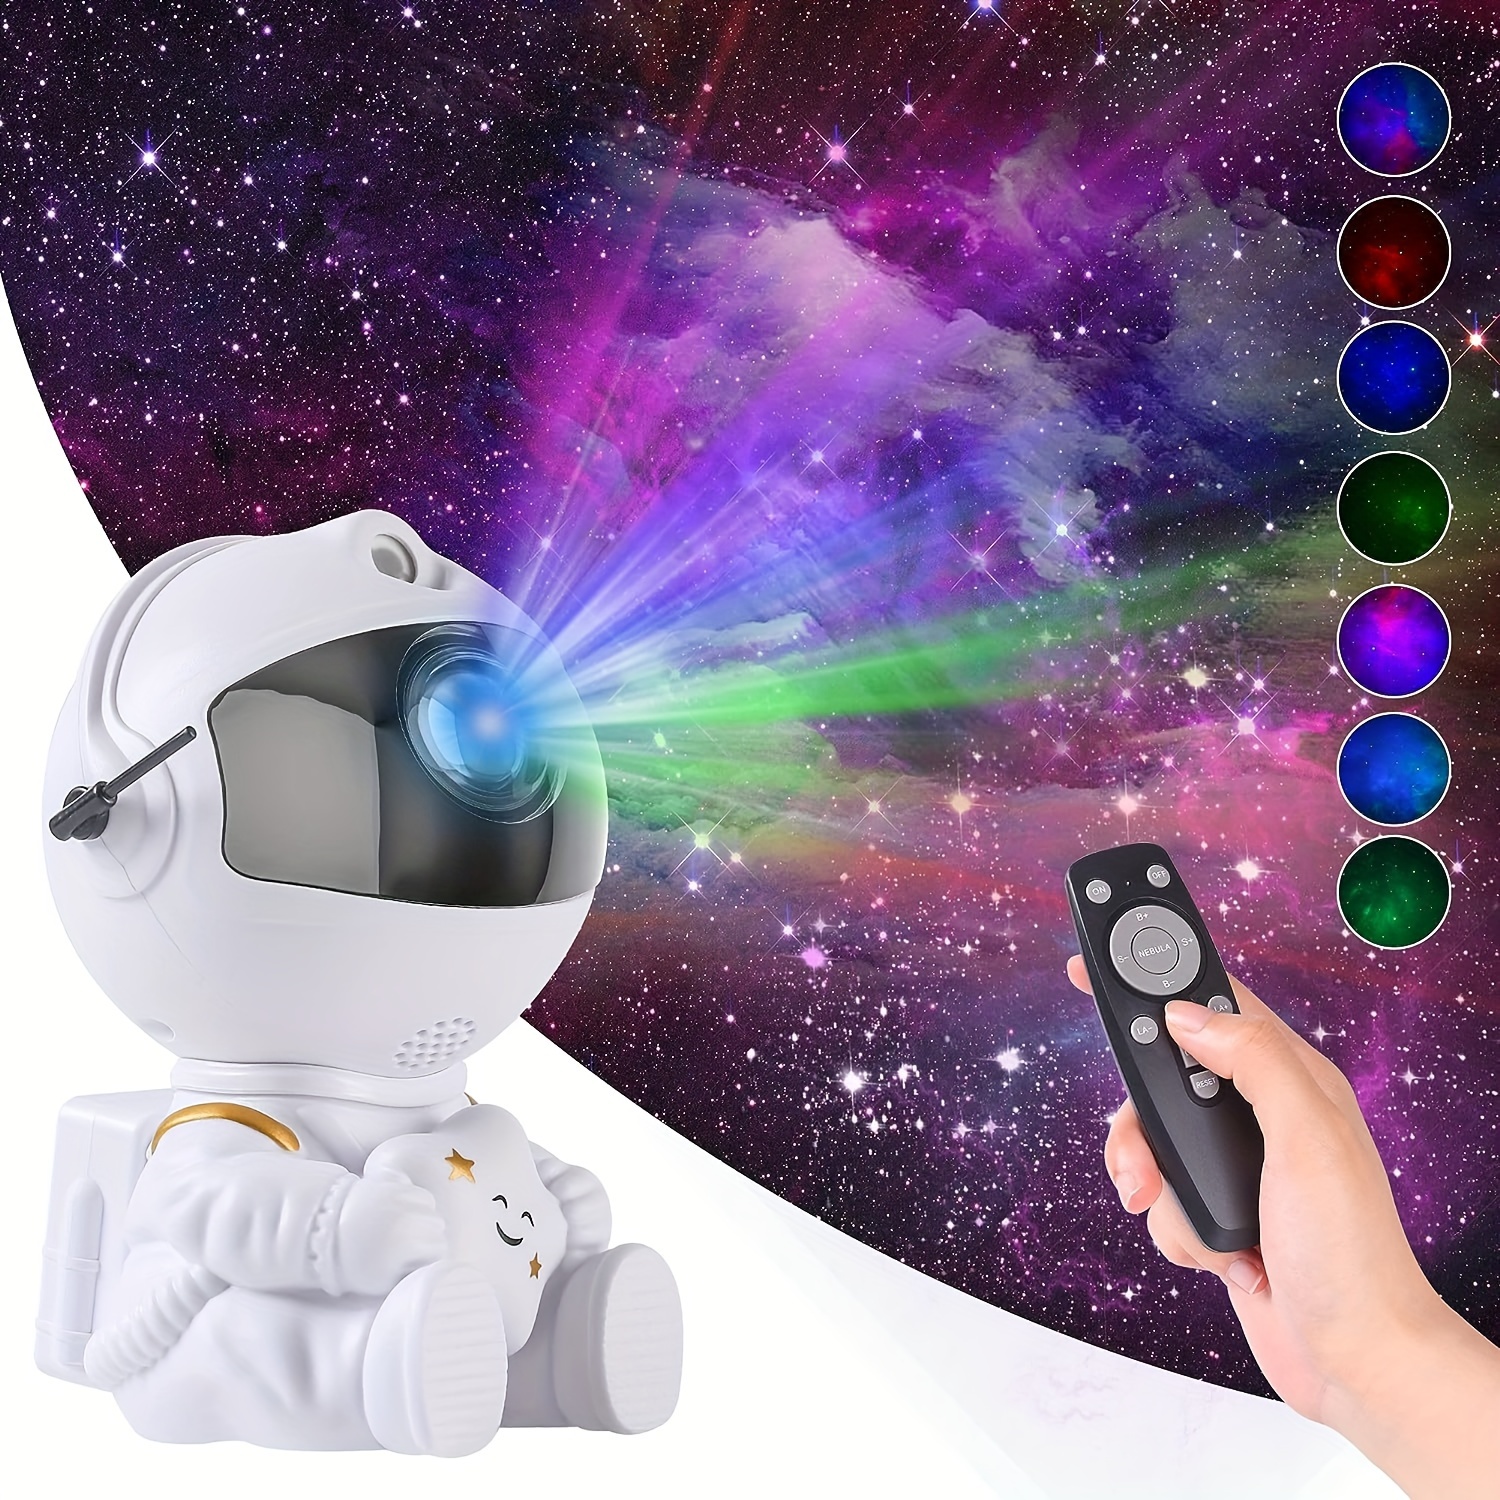 Amazm Astronaut Star Projector Galaxy Projector Light, Remote Control  Spaceman Night Light with Timer, for Gaming Room, Home Theater, Kids Adult